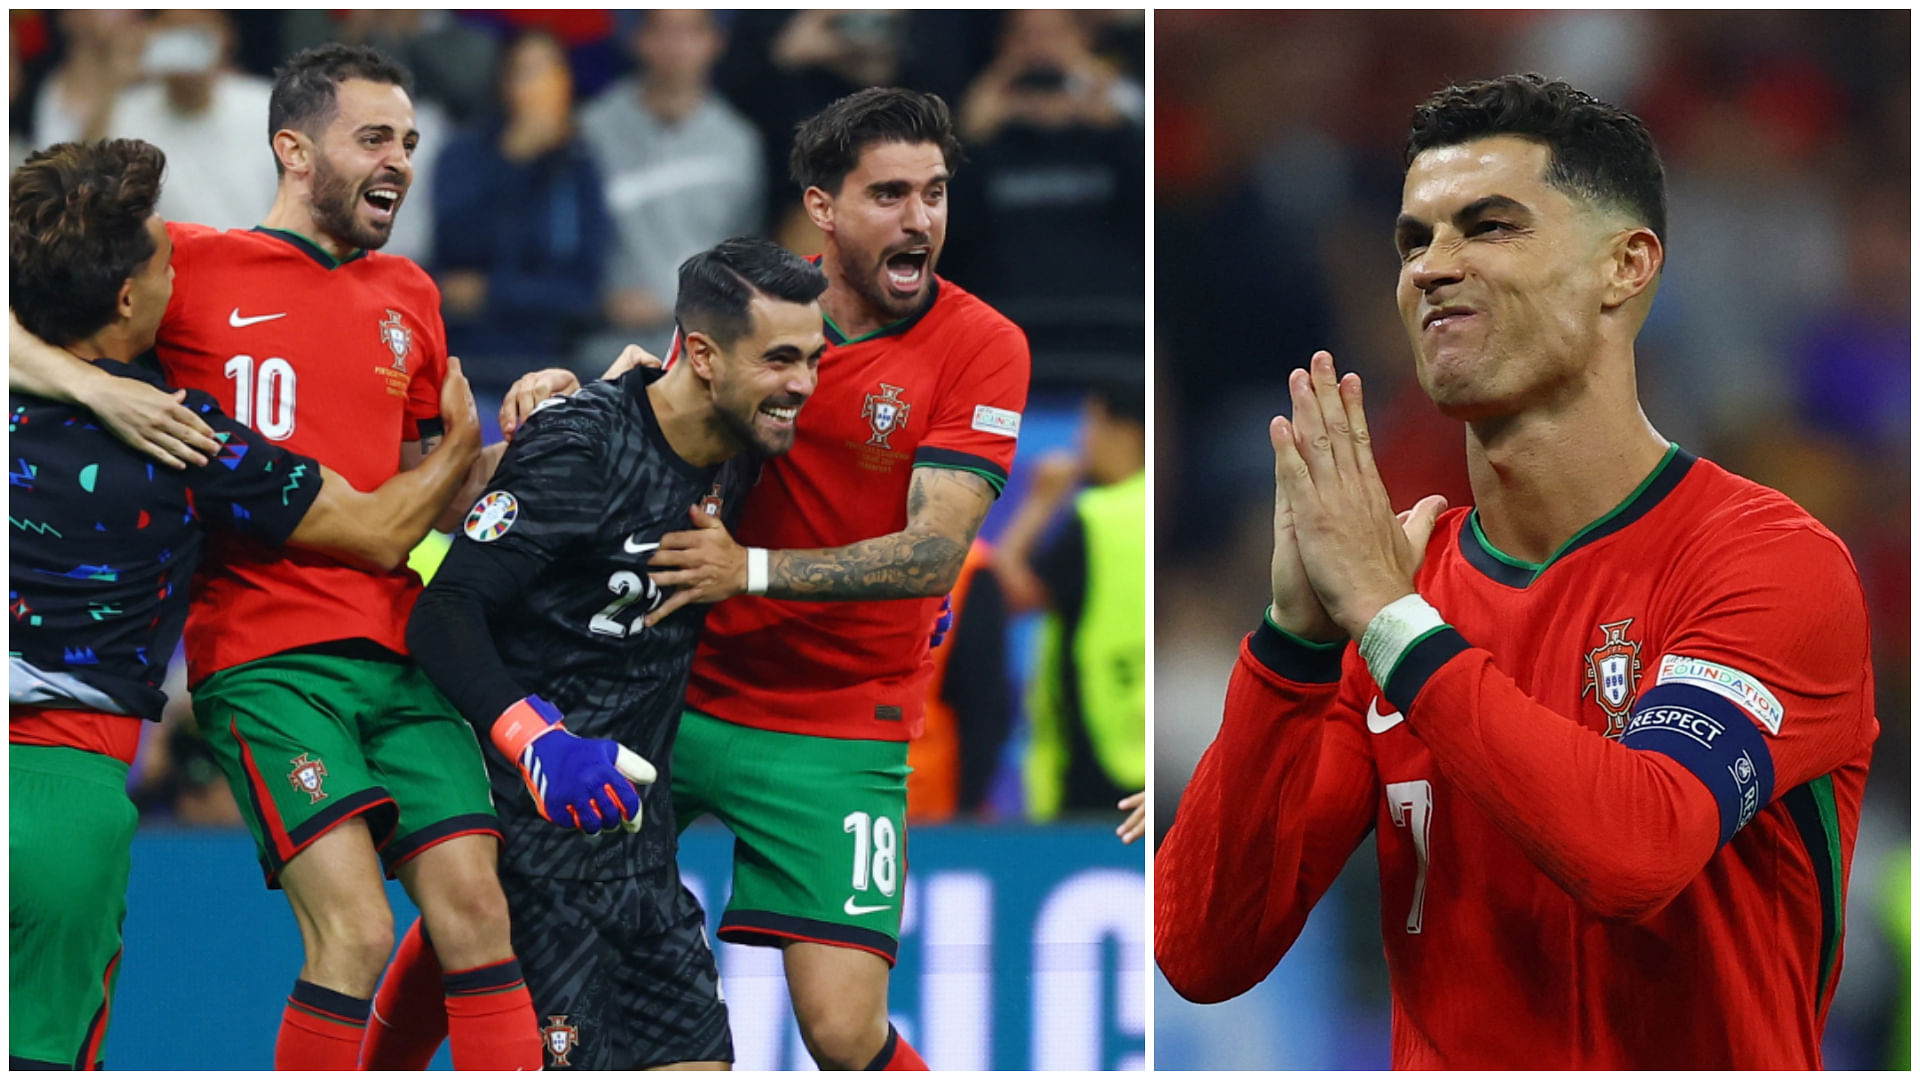 Ronaldo relieved as Portugal beat Slovenia in shootout to reach quarters | The Daily Star